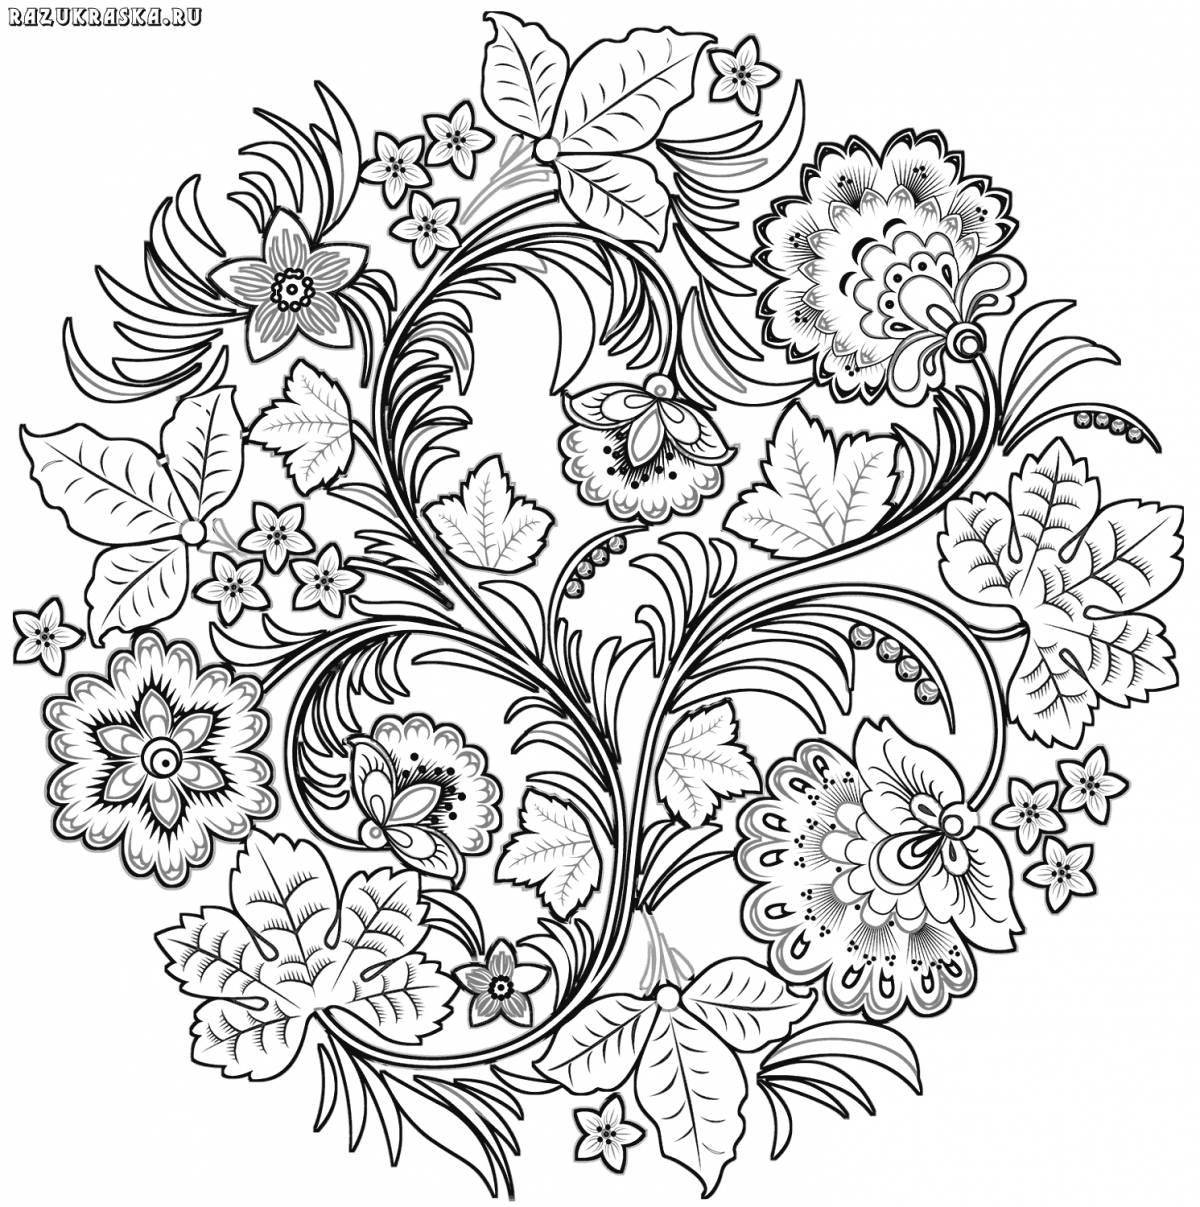 Coloring bright Russian pattern